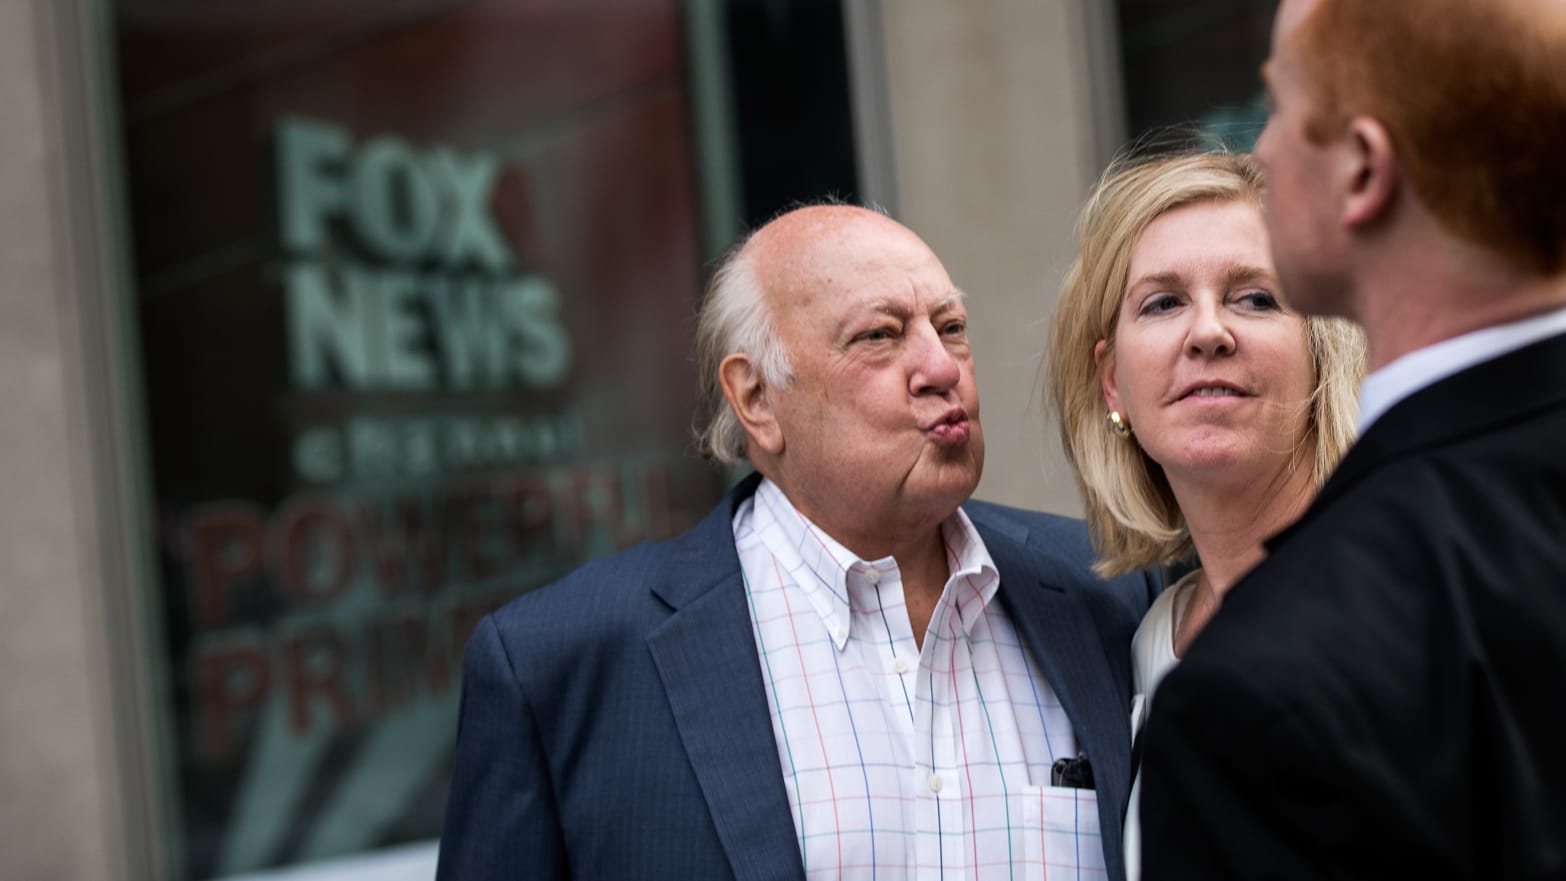 Roger Ailes Accuser Laura Luhn Sues Fox News and Trumps Ex-Comms Director Bill Shine